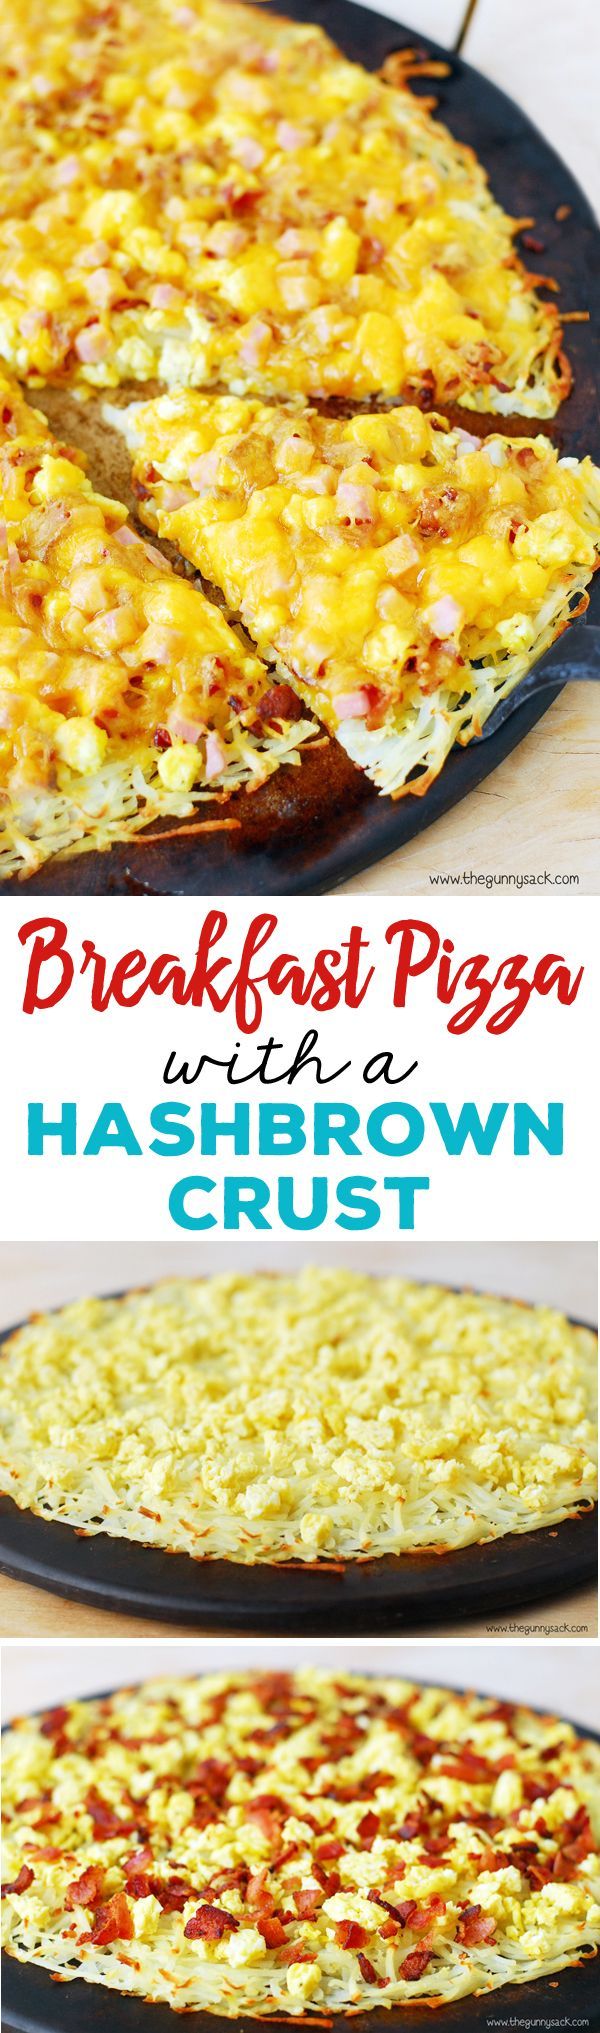 This delicious recipe for breakfast pizza with a hash brown crust can be made for breakfast or as an easy